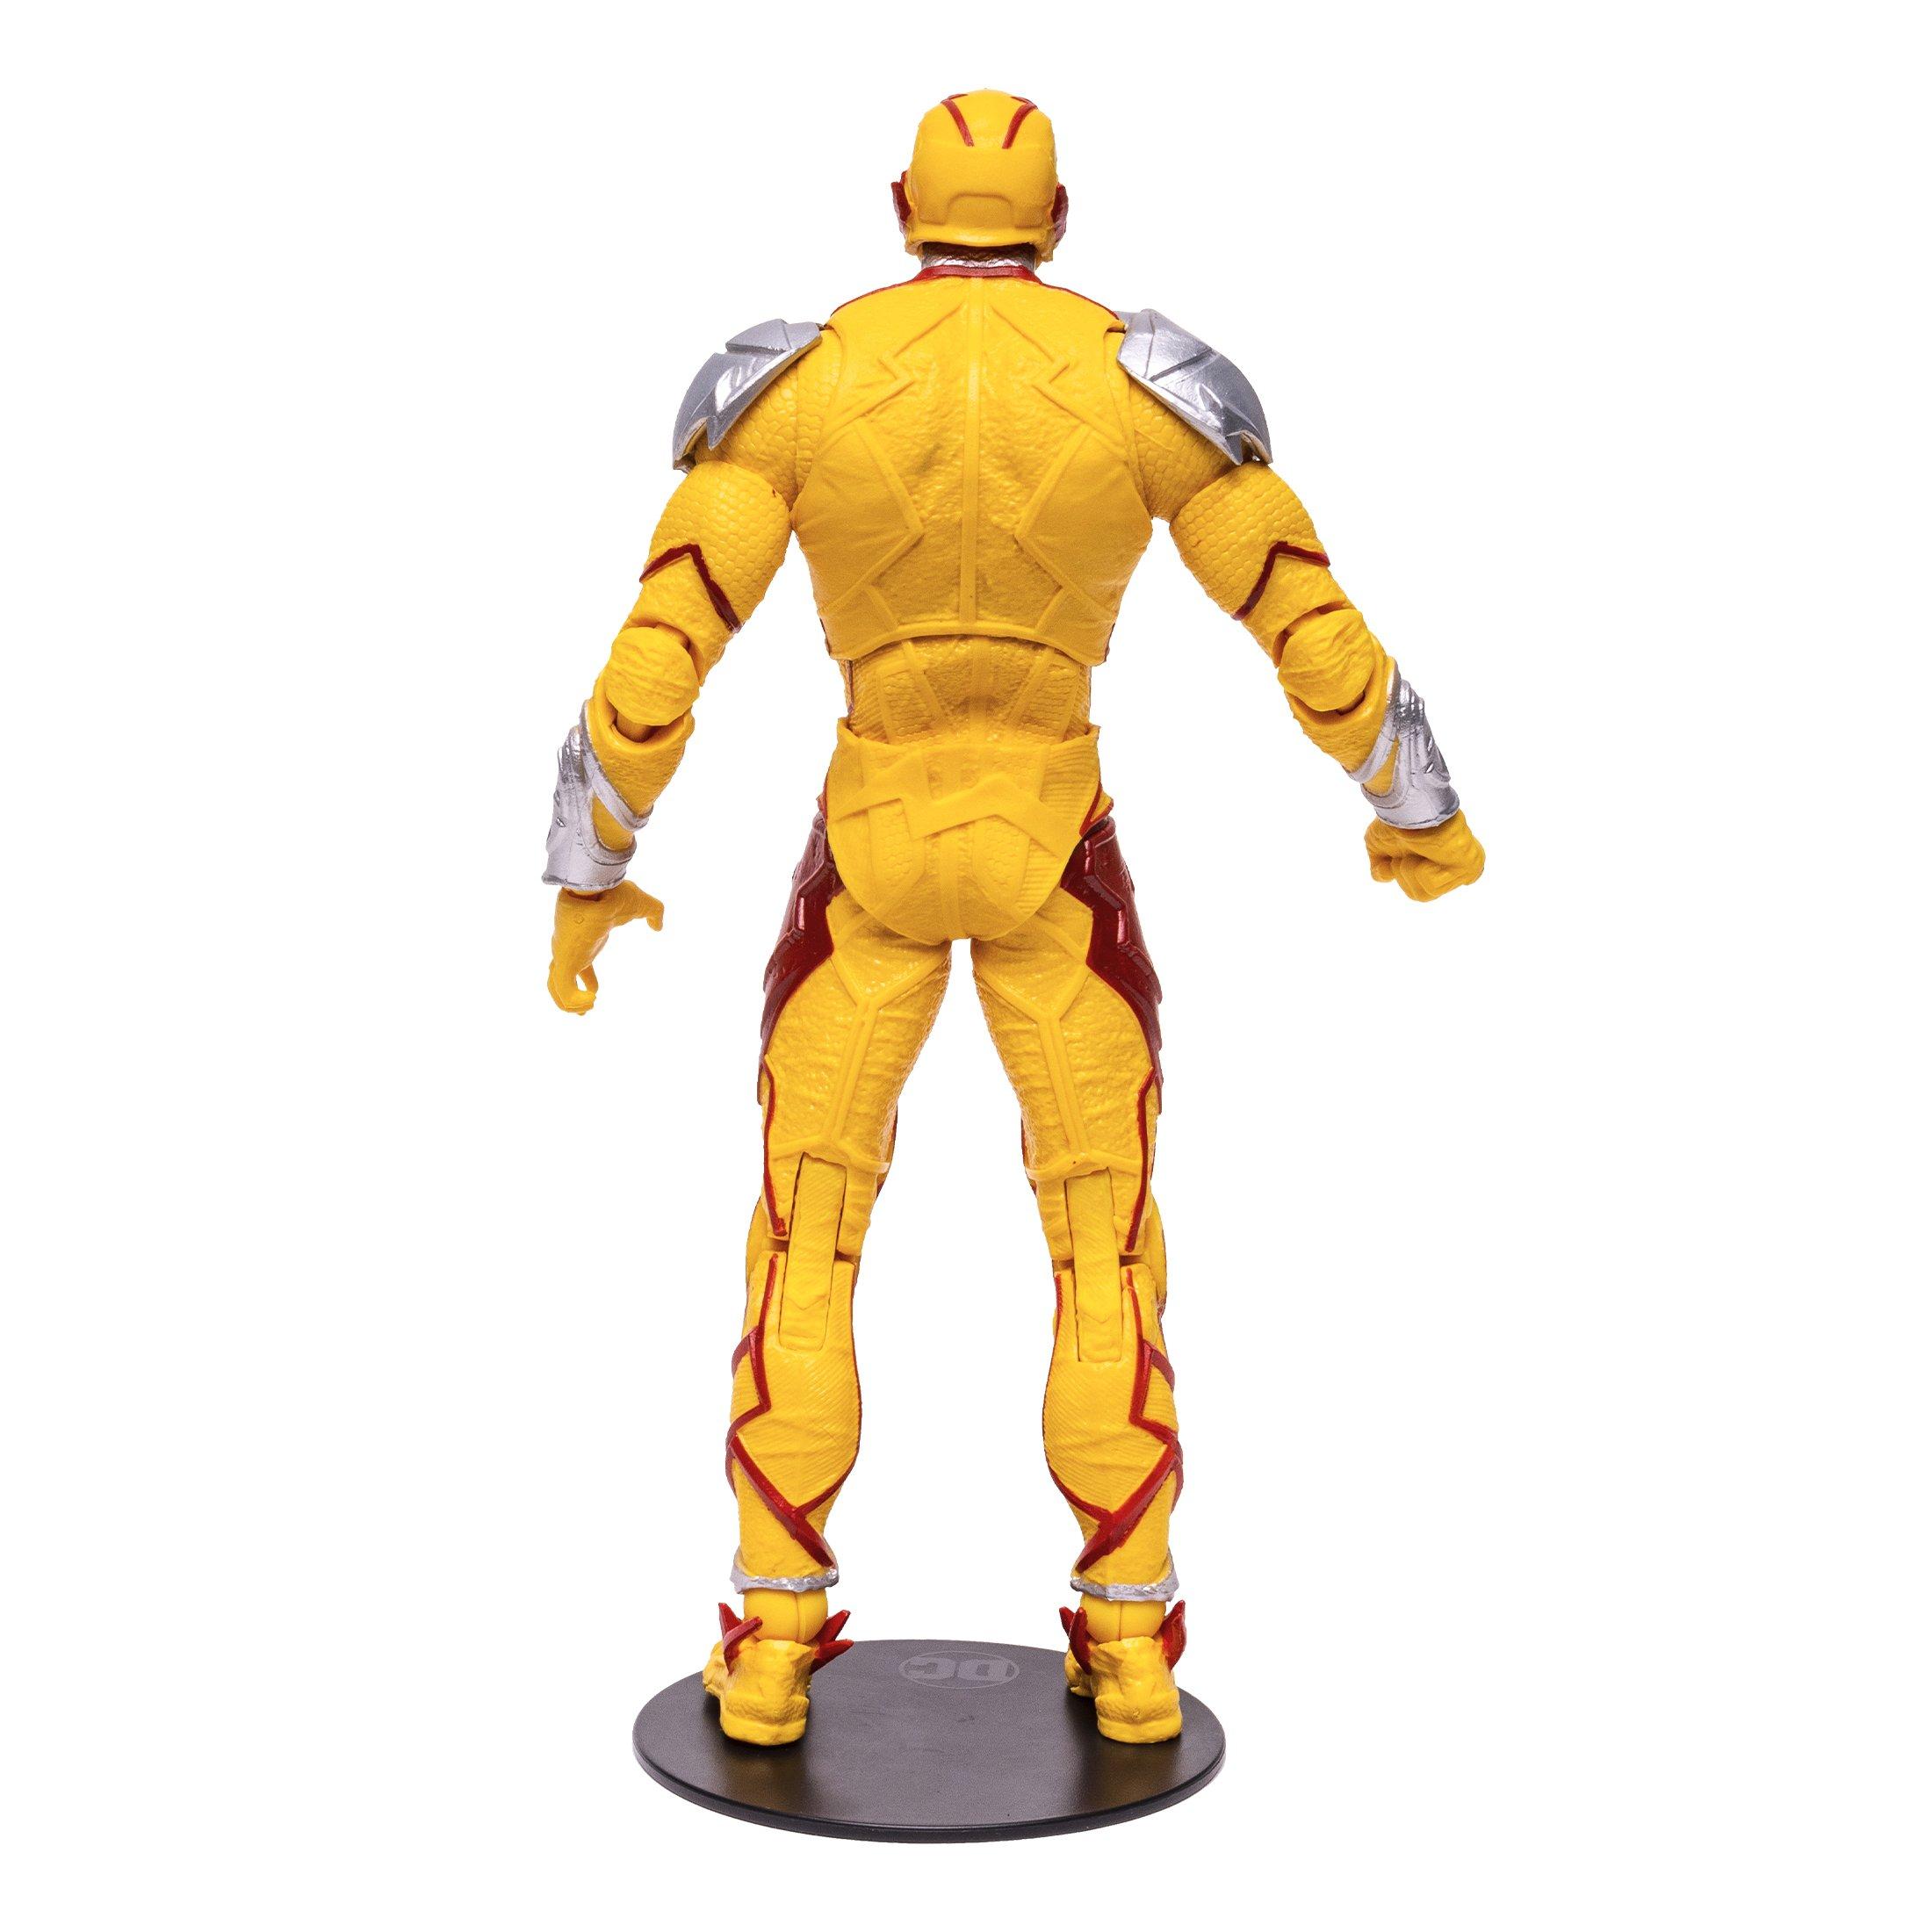 McFarlane Toys DC Multiverse Injustice 2 Reverse Flash 7-in Scale Action Figure